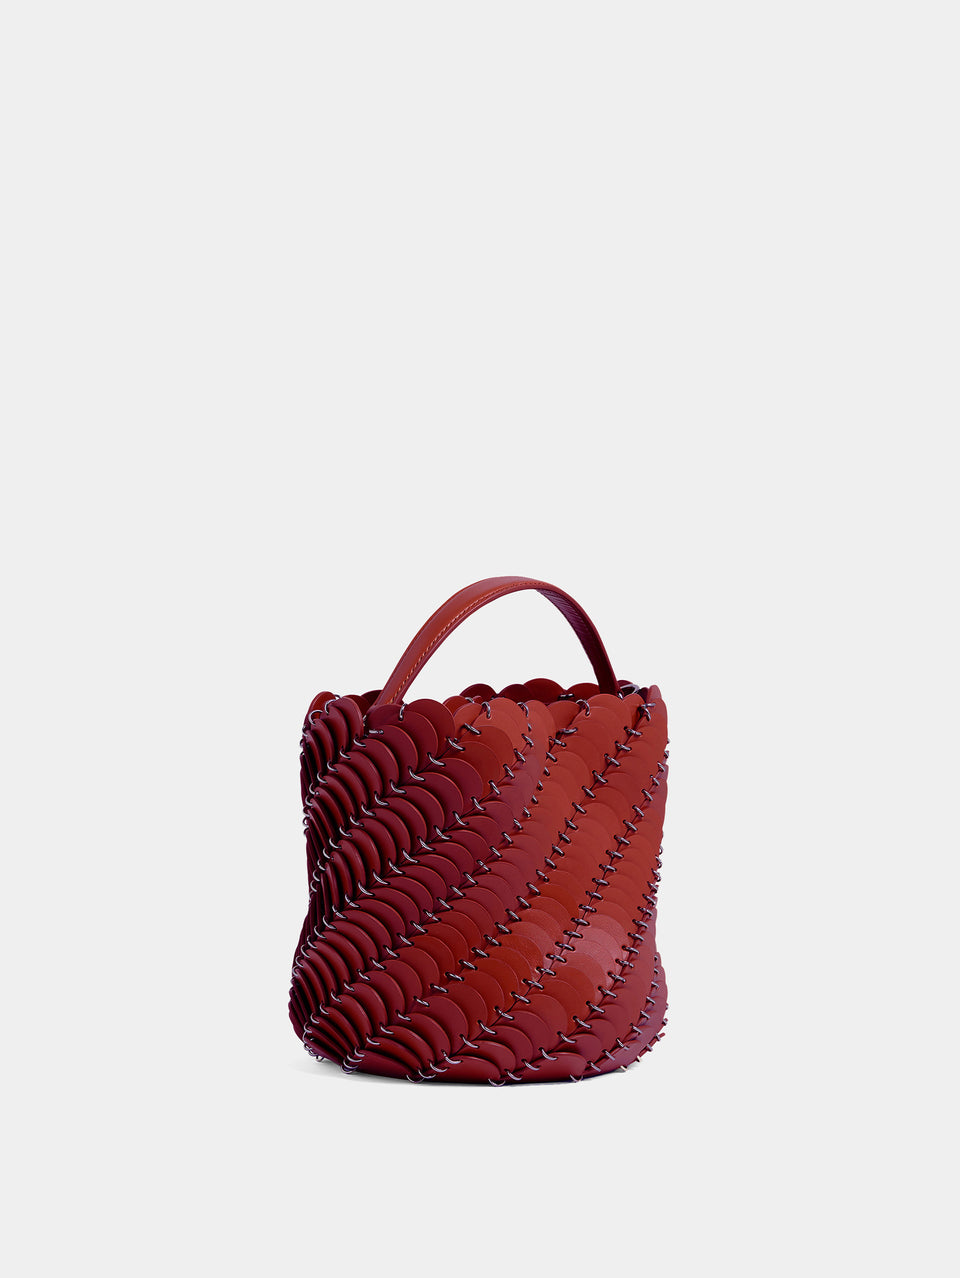 Medium Merlot and Silver Paco bucket bag in leather